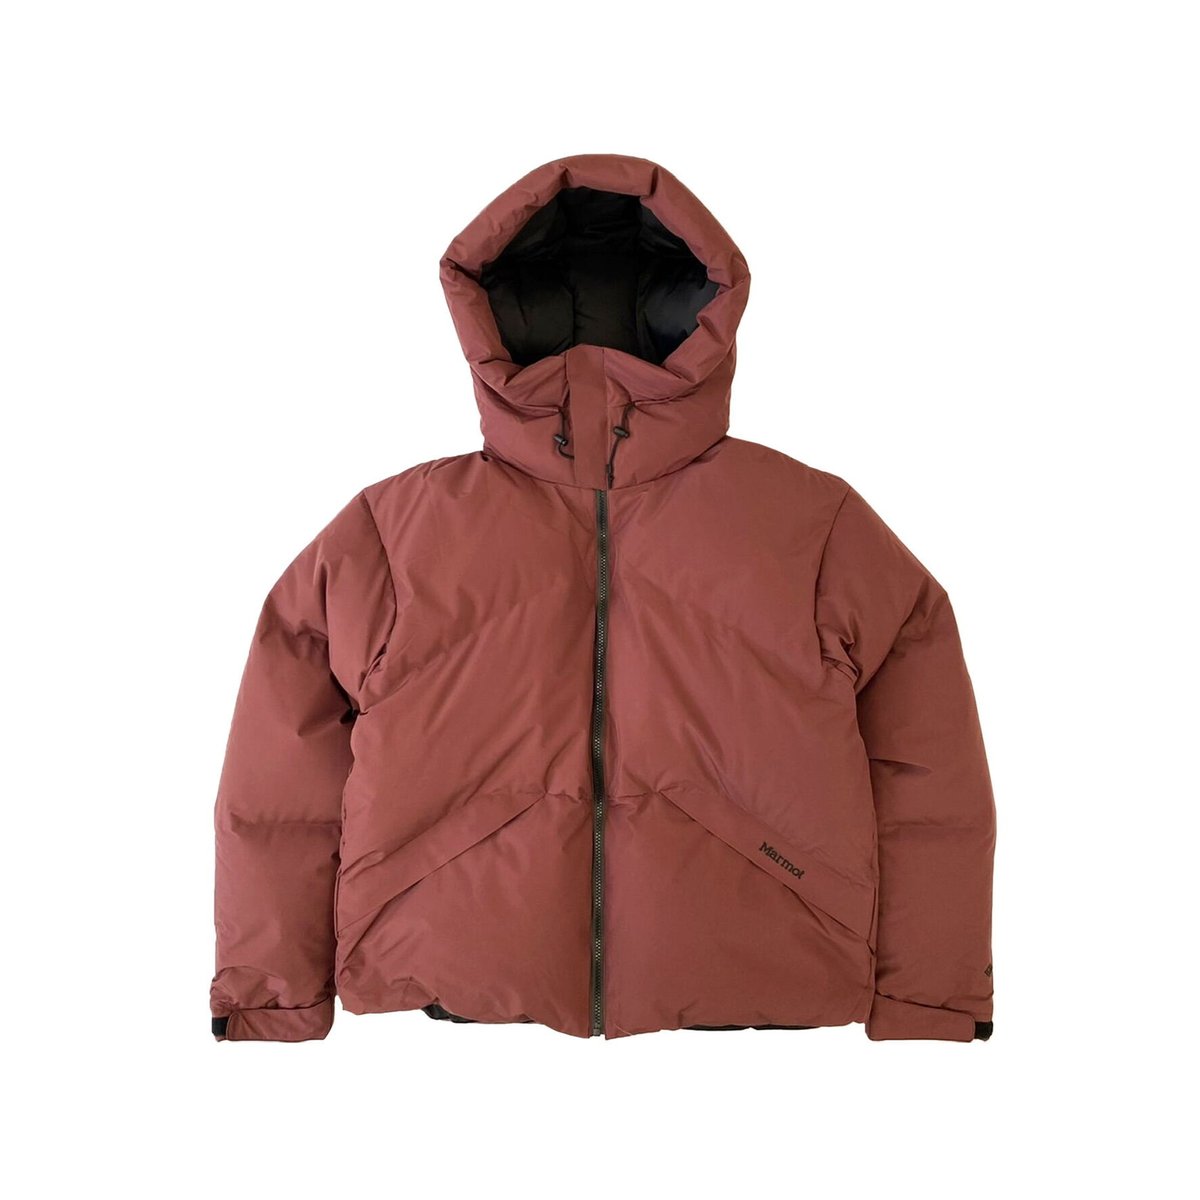 VAINL ARCHIVE connected MARMOT “PUFF HOODY” BGD